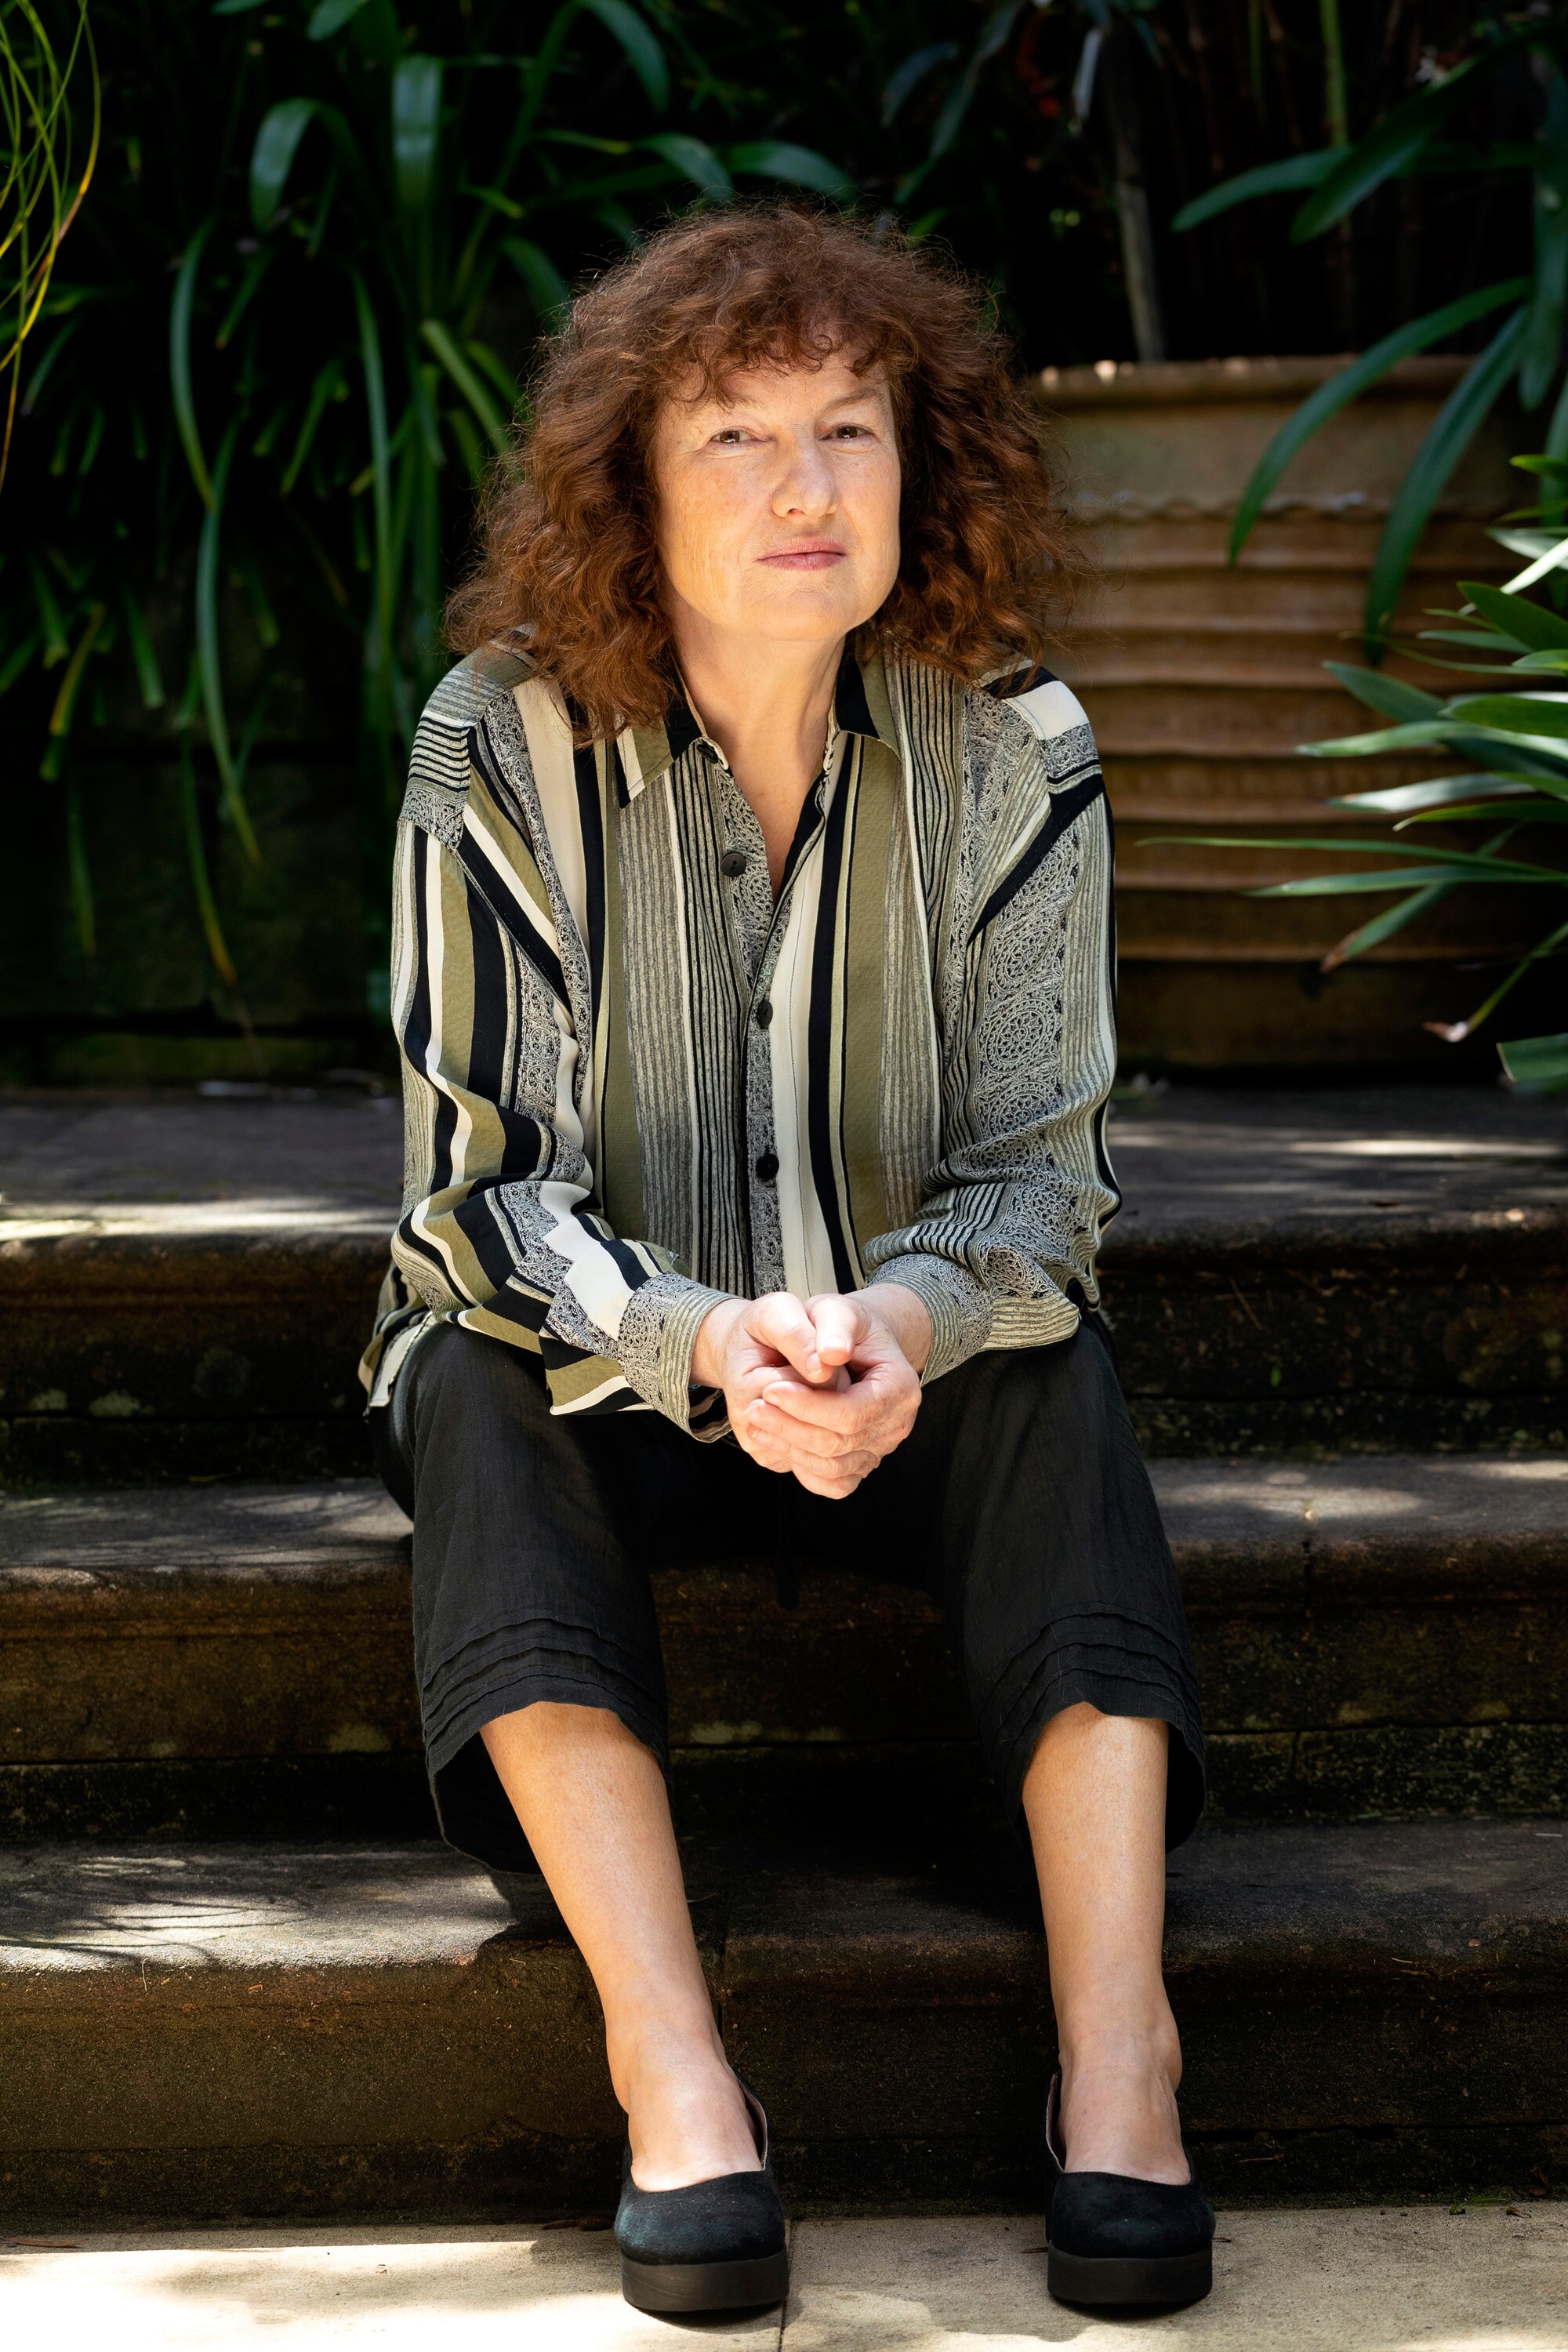 A 60-something woman with brown hair sits on outside steps, in a garden, her hands clasped in her lap